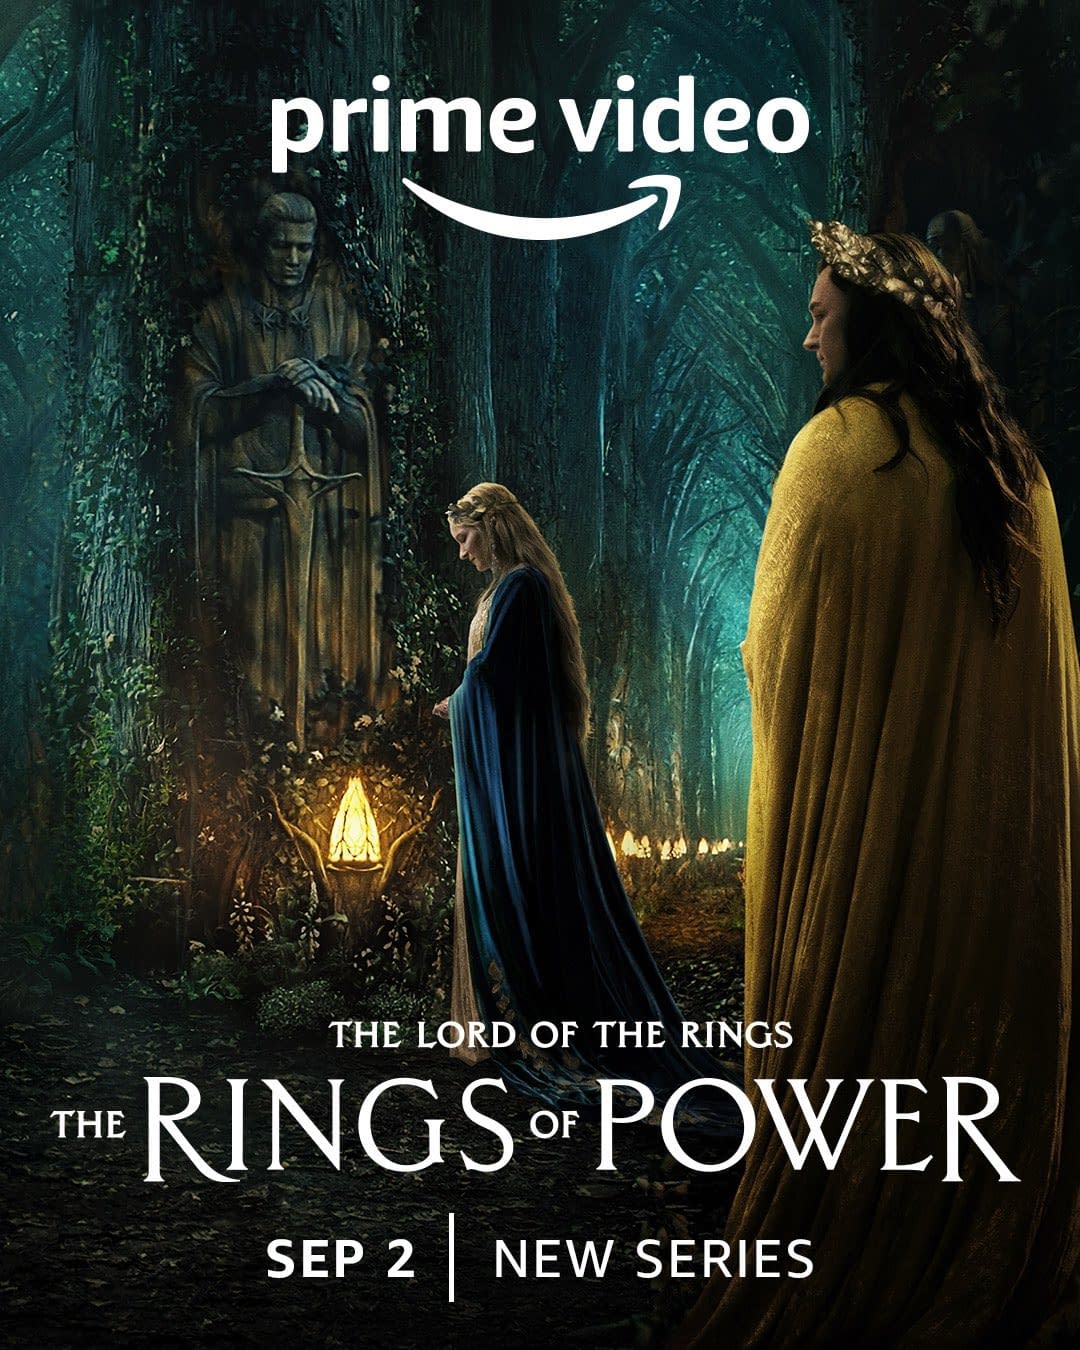 The Lord Of The Rings: The Rings Of Power' Review - A Masterpiece